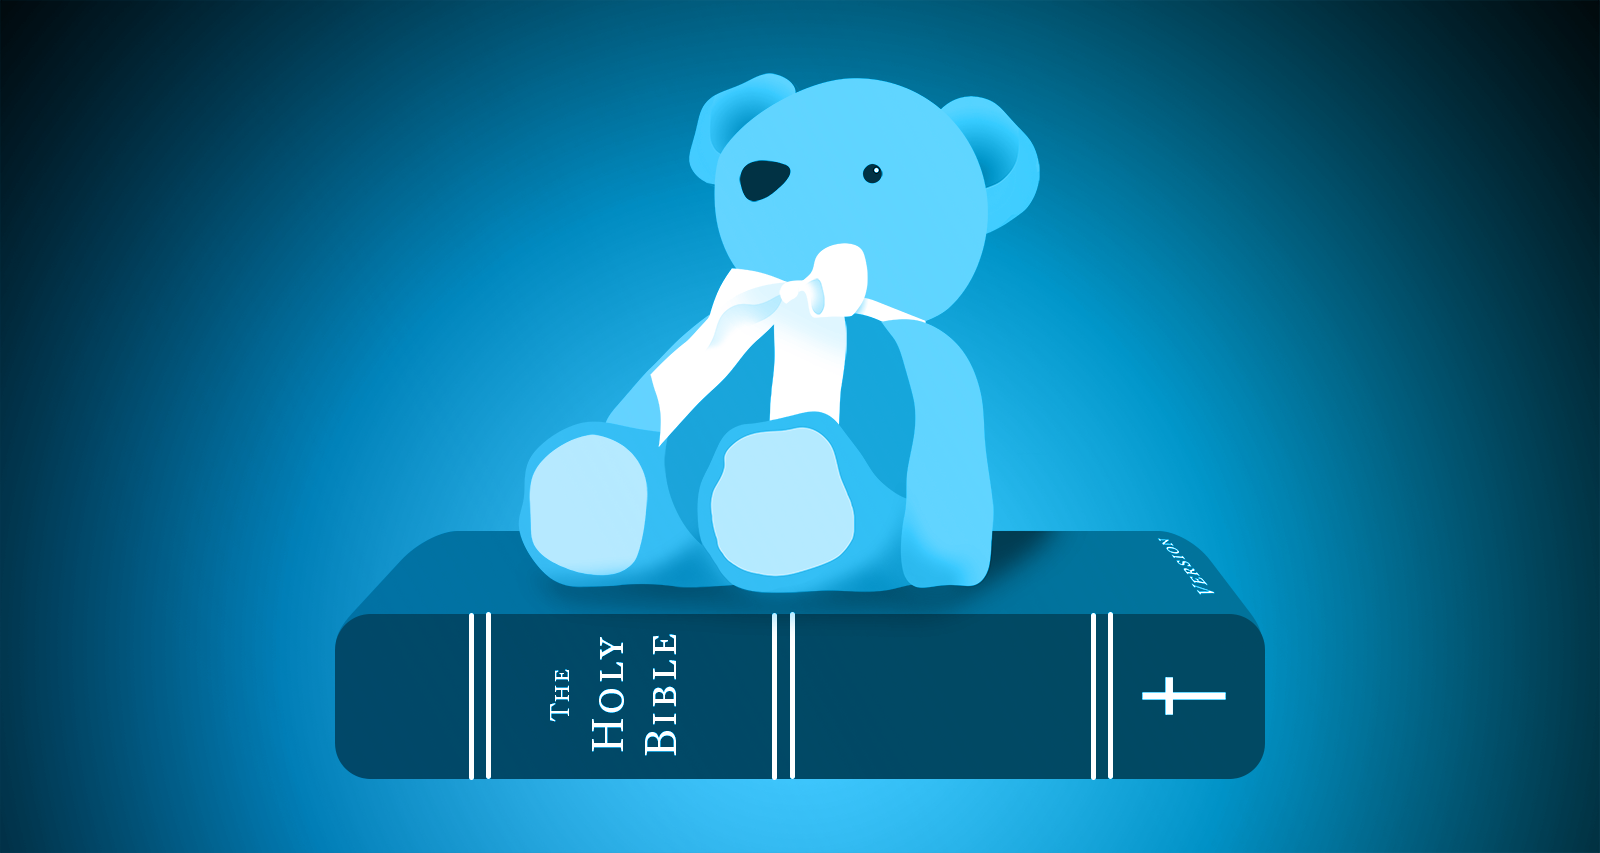 Teddy bear on top of a bible